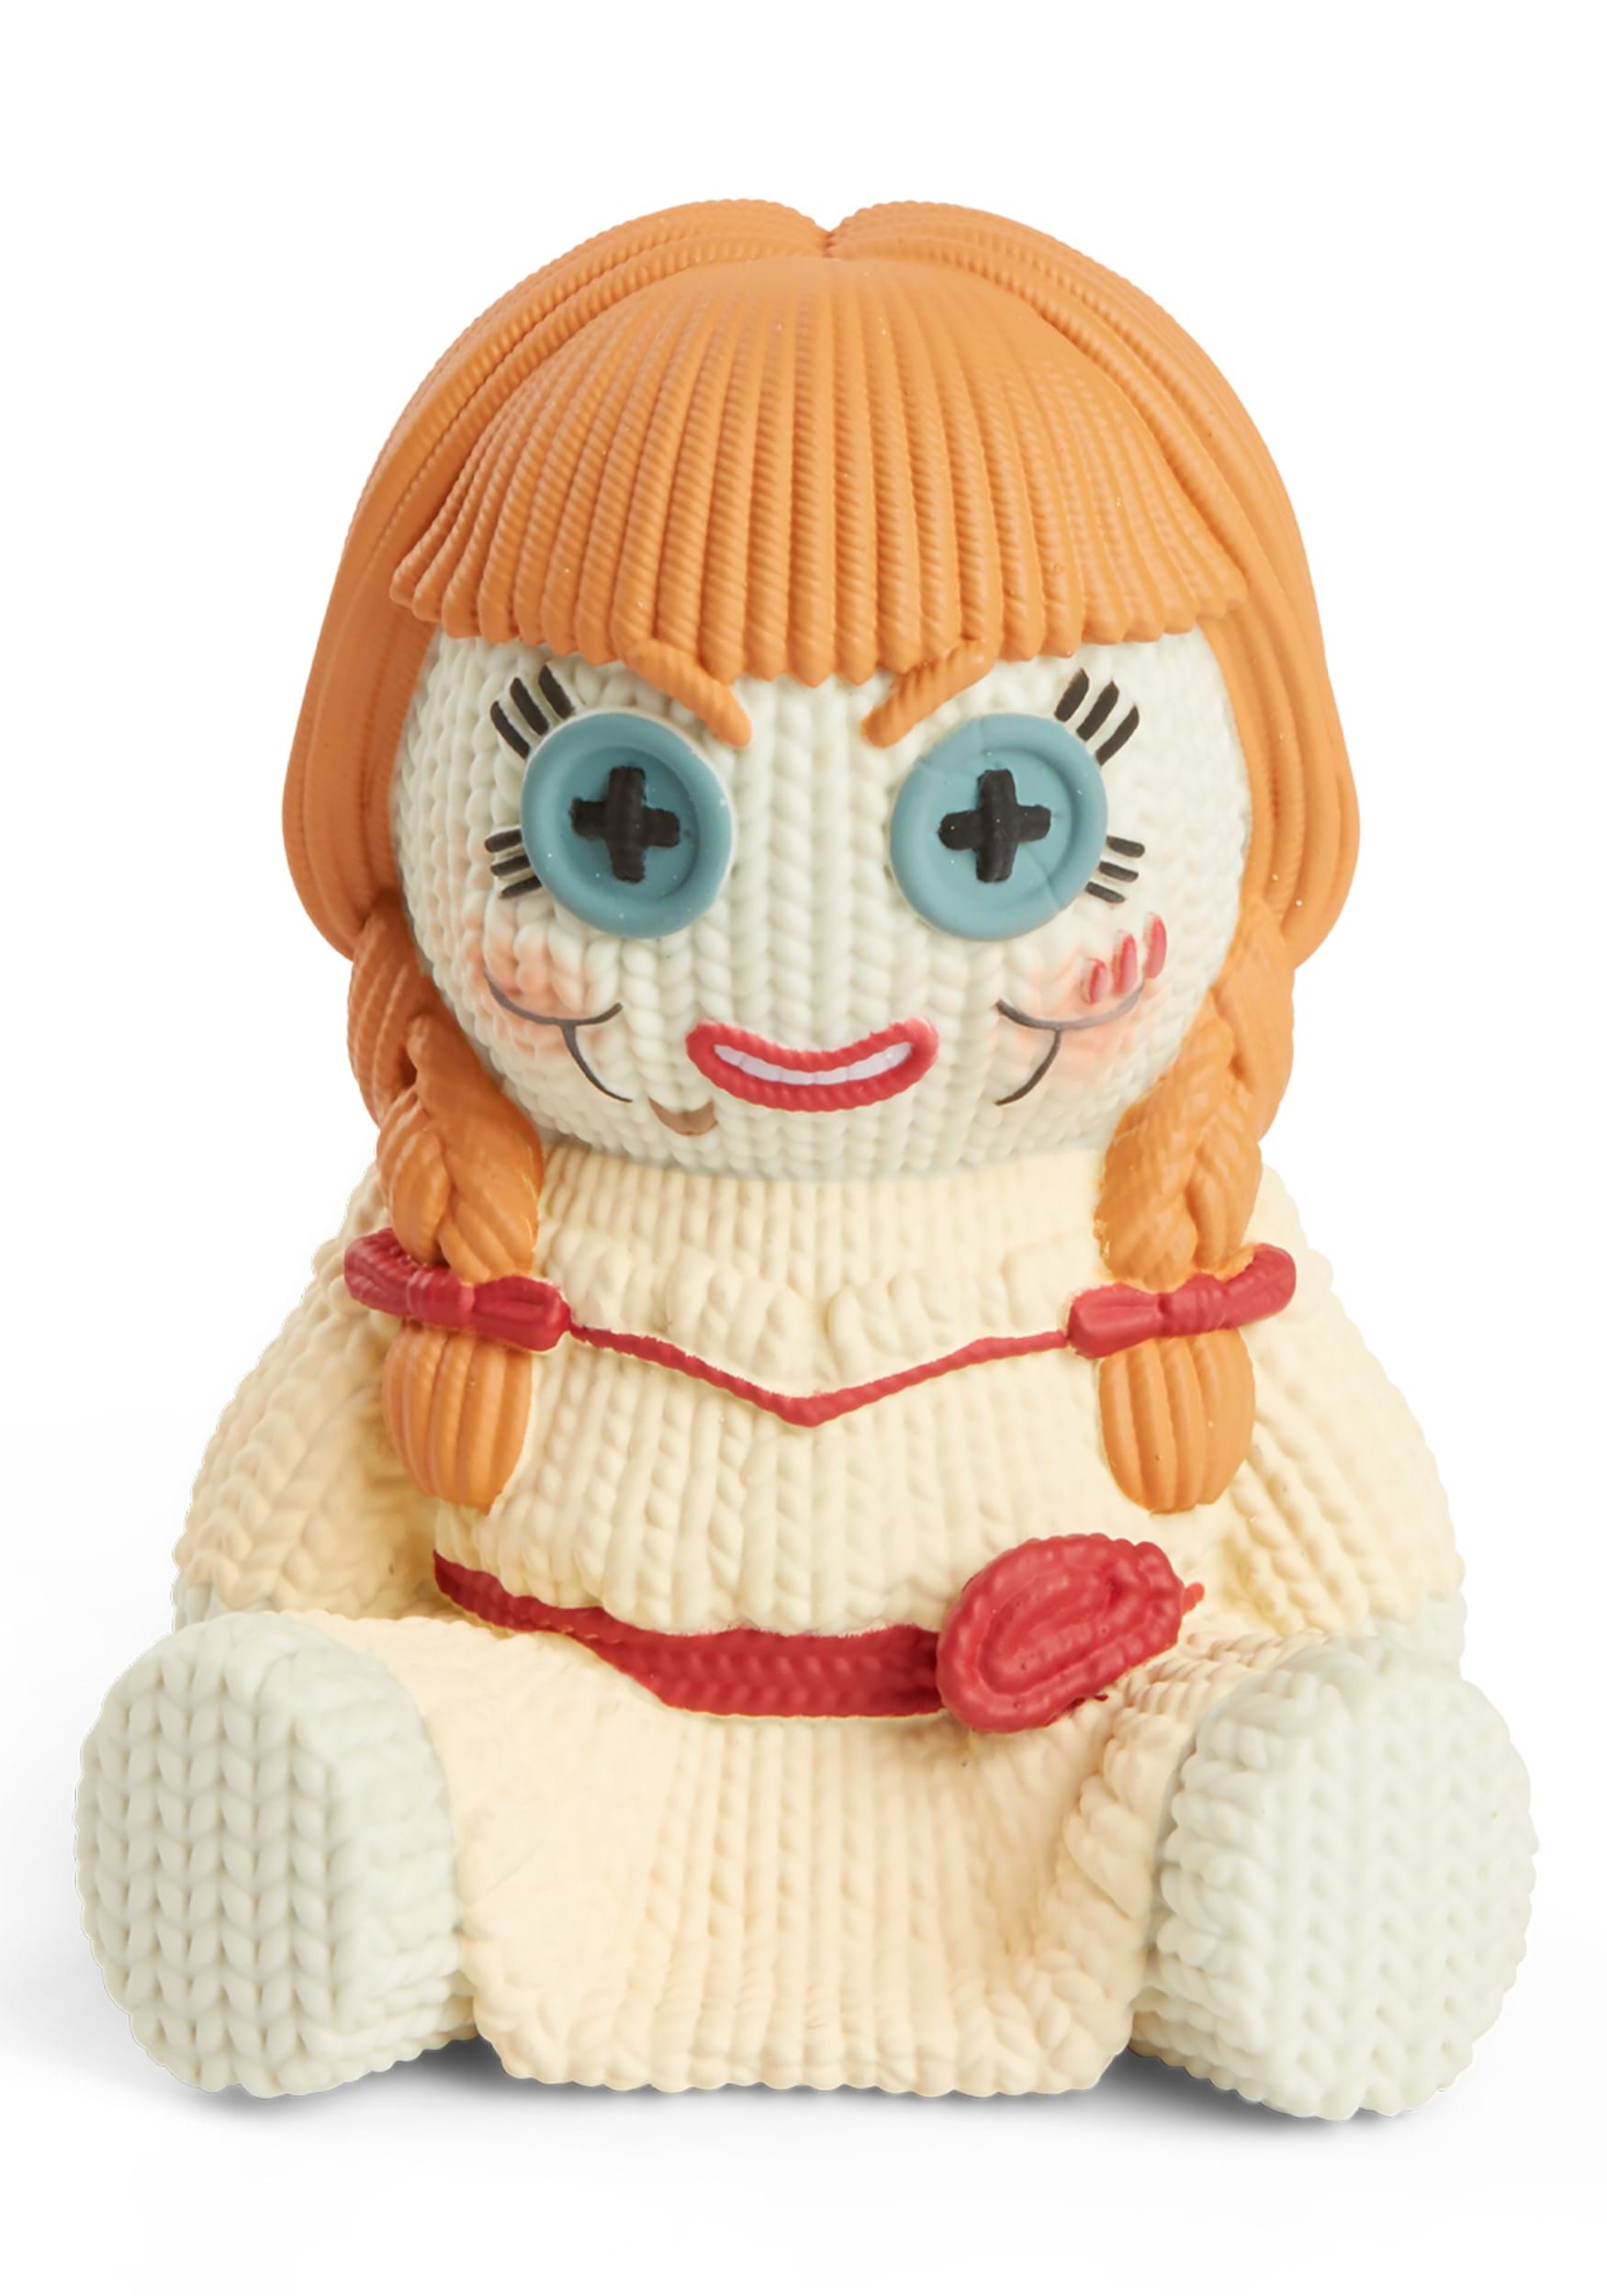 The Conjuring Annabelle Handmade by Robots Vinyl Figure